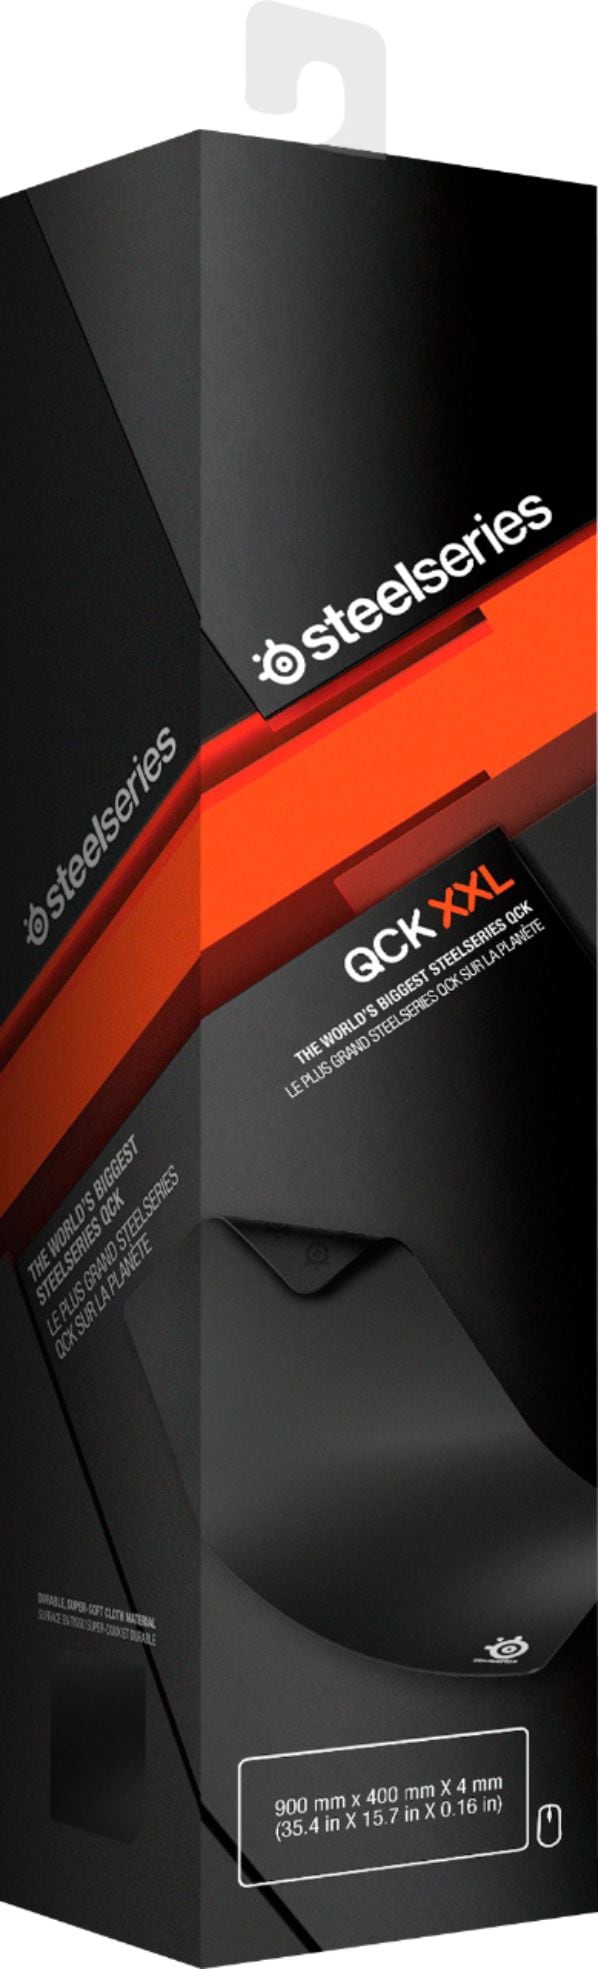 SteelSeries - QcK Cloth Gaming Mouse Pad (XXL) - Black_3